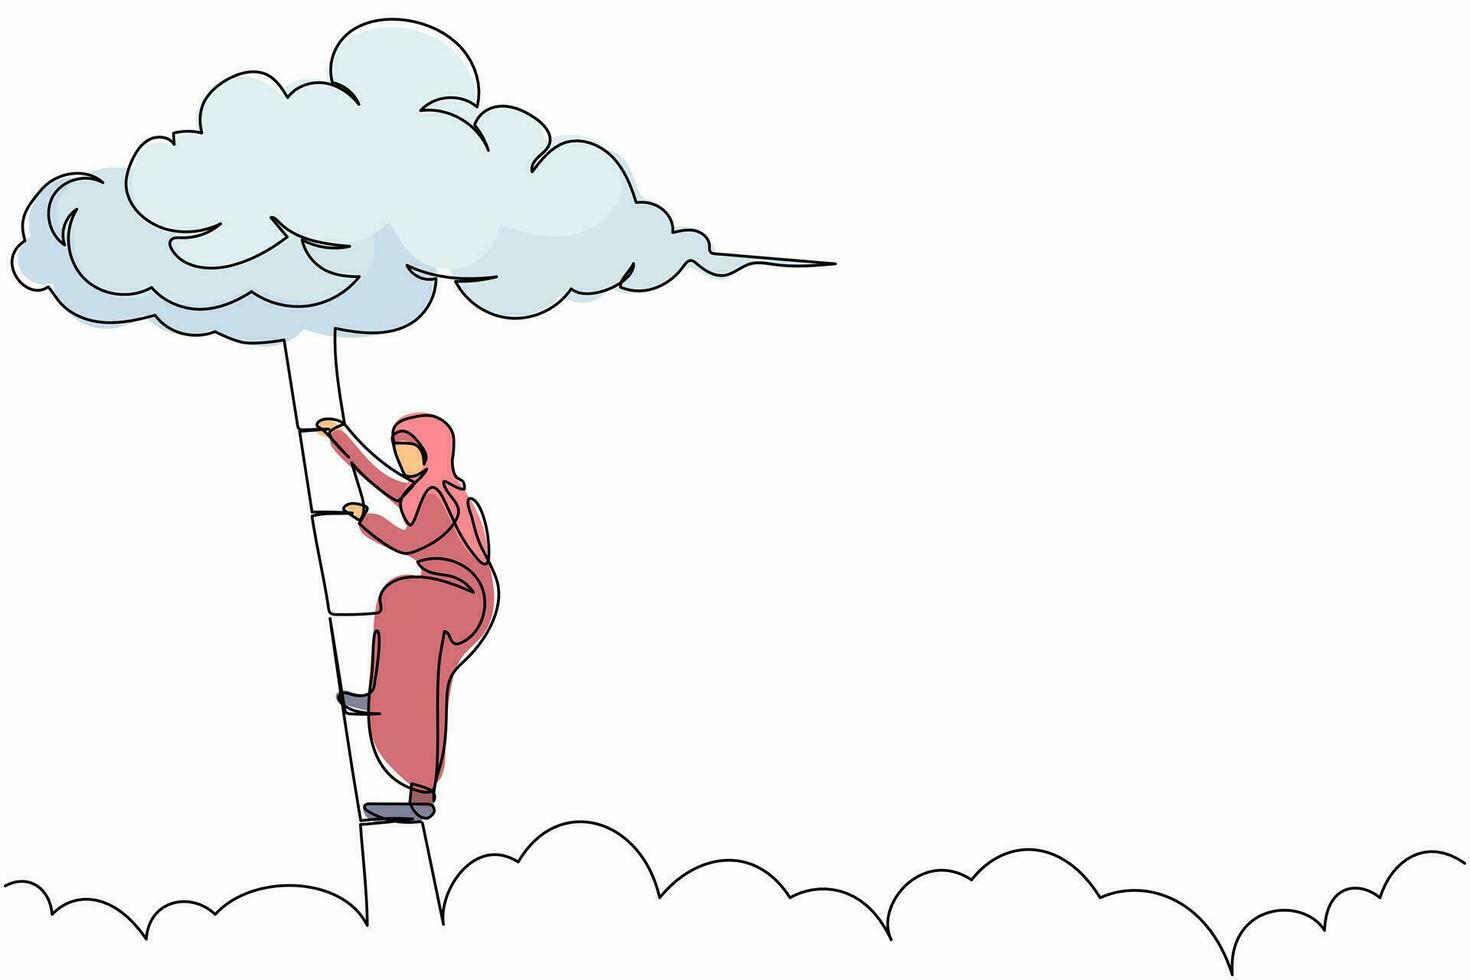 Single one line drawing Arabian businesswoman climbing up ladder to cloud. Professional career growth promotion. Business development program. Continuous line draw design graphic vector illustration